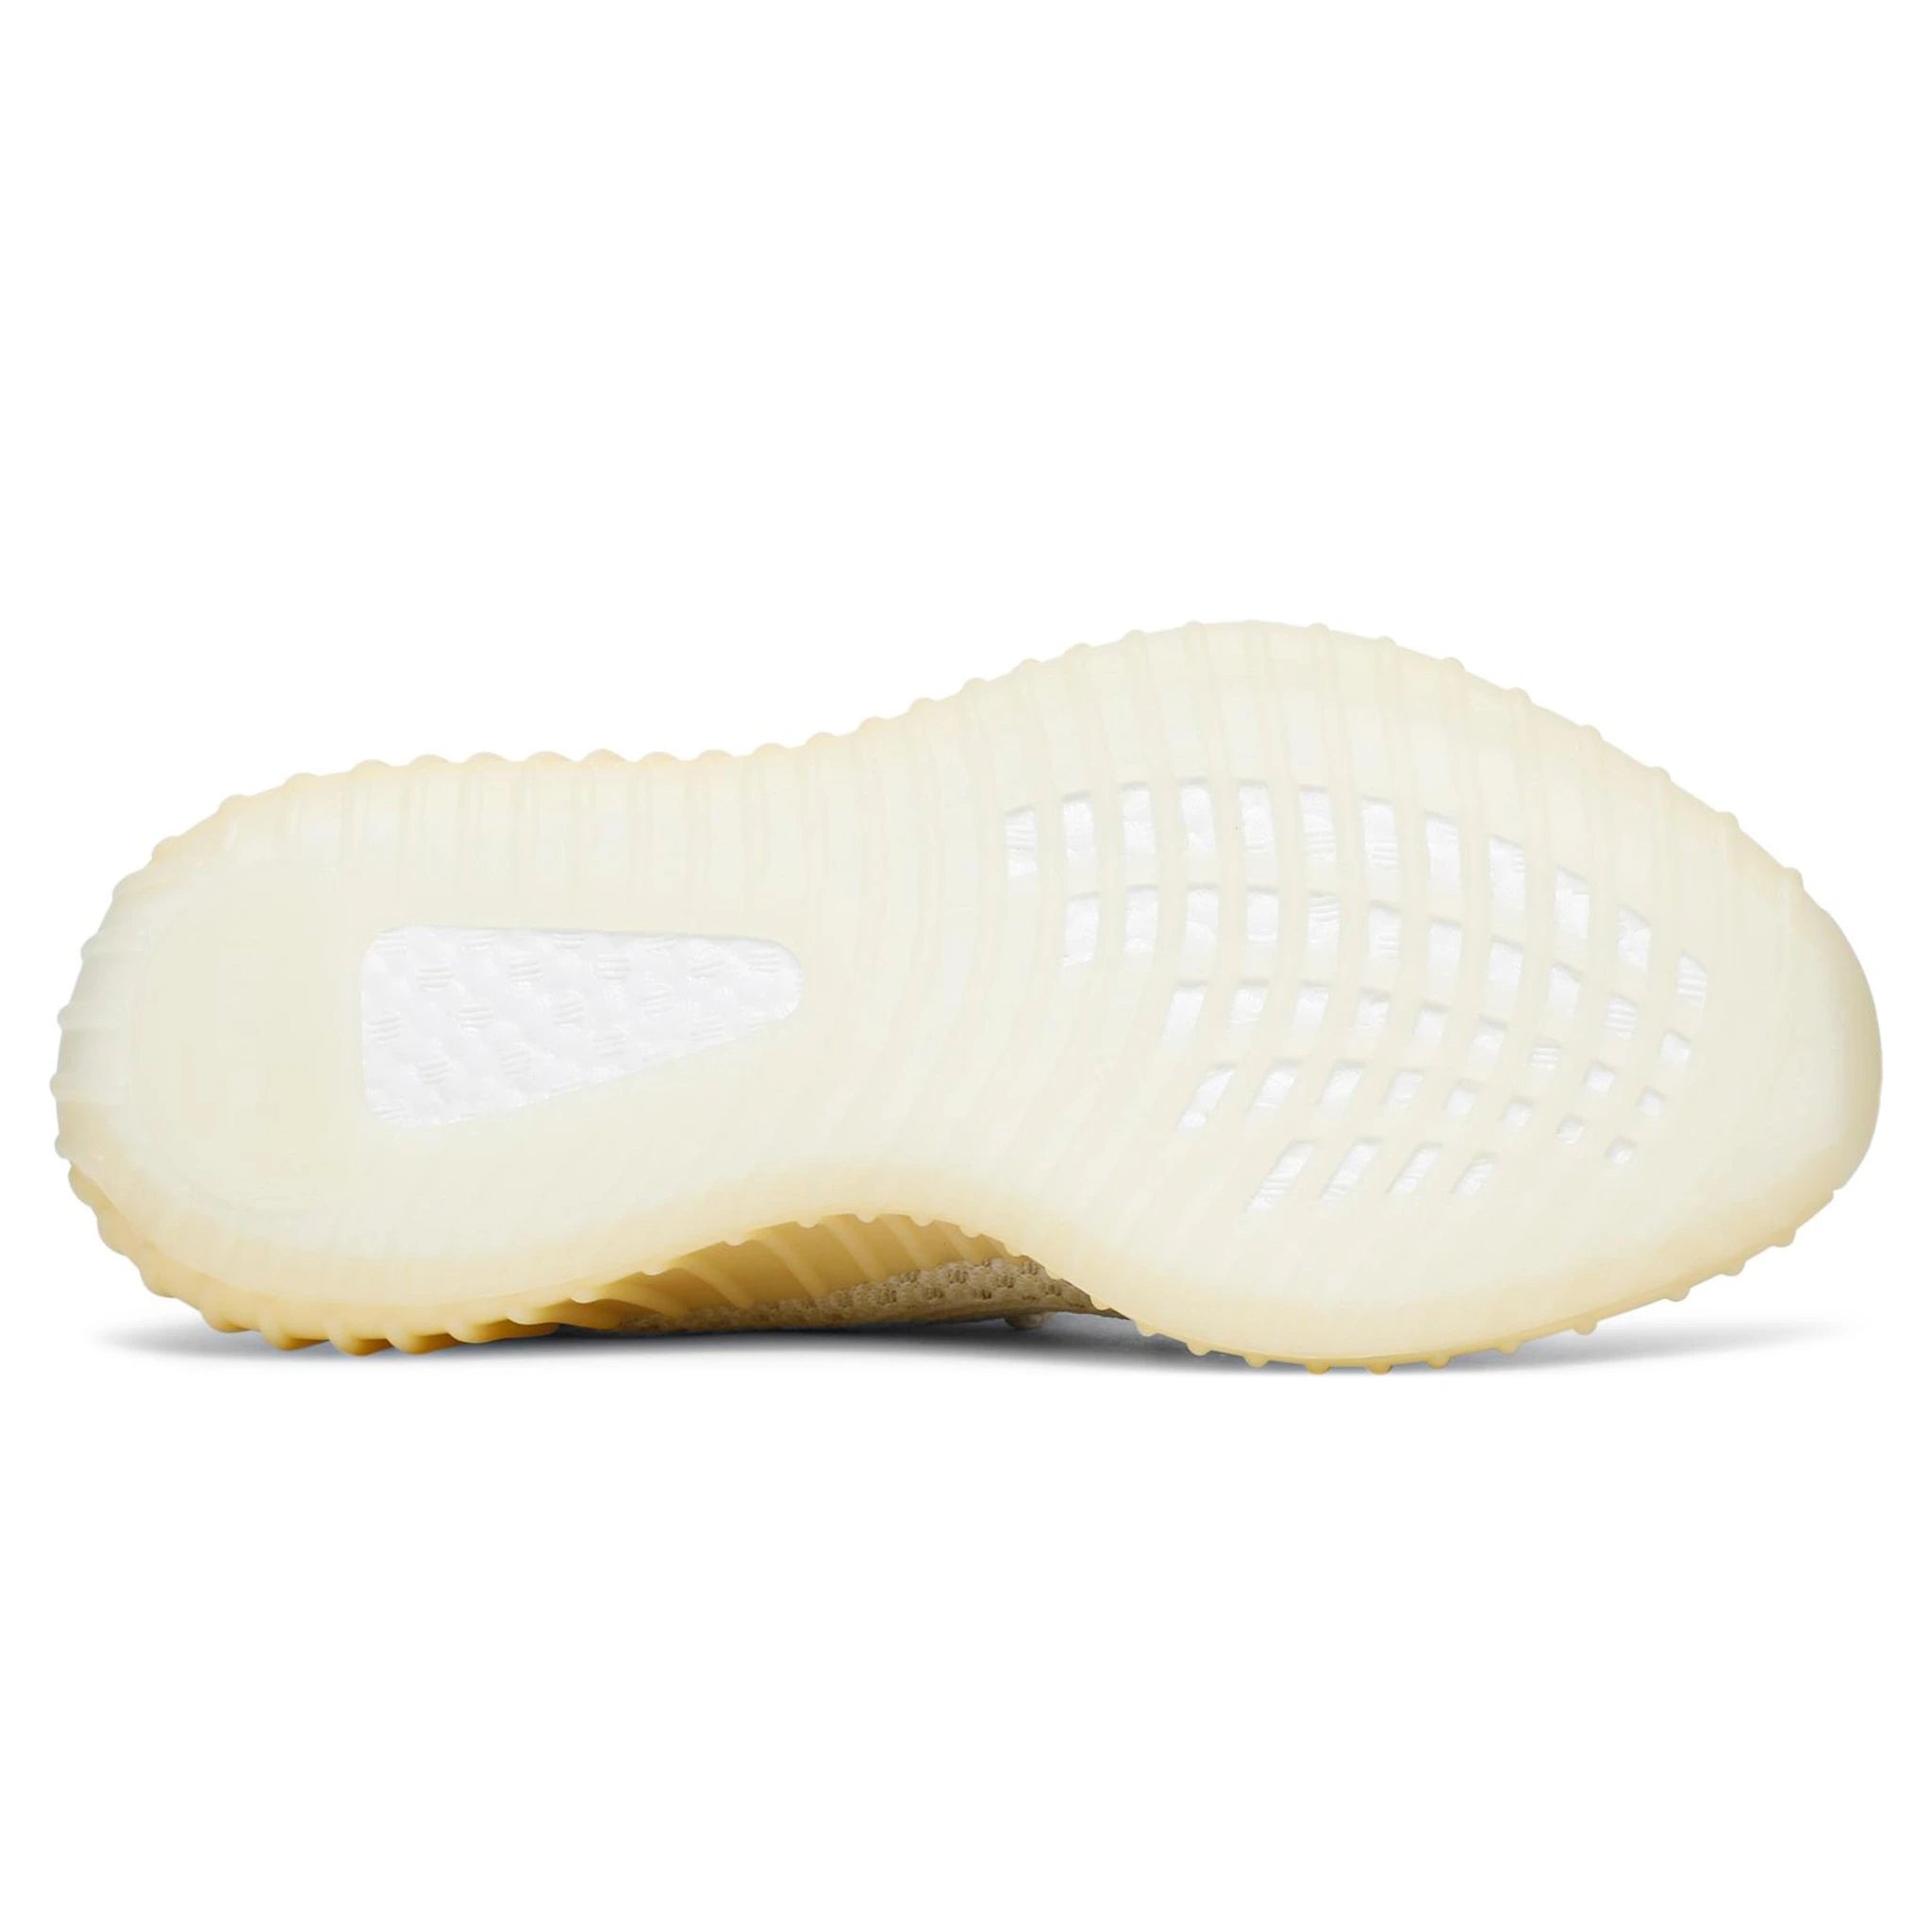 Sole view of Adidas Yeezy Boost 350 V2 Natural FZ5246